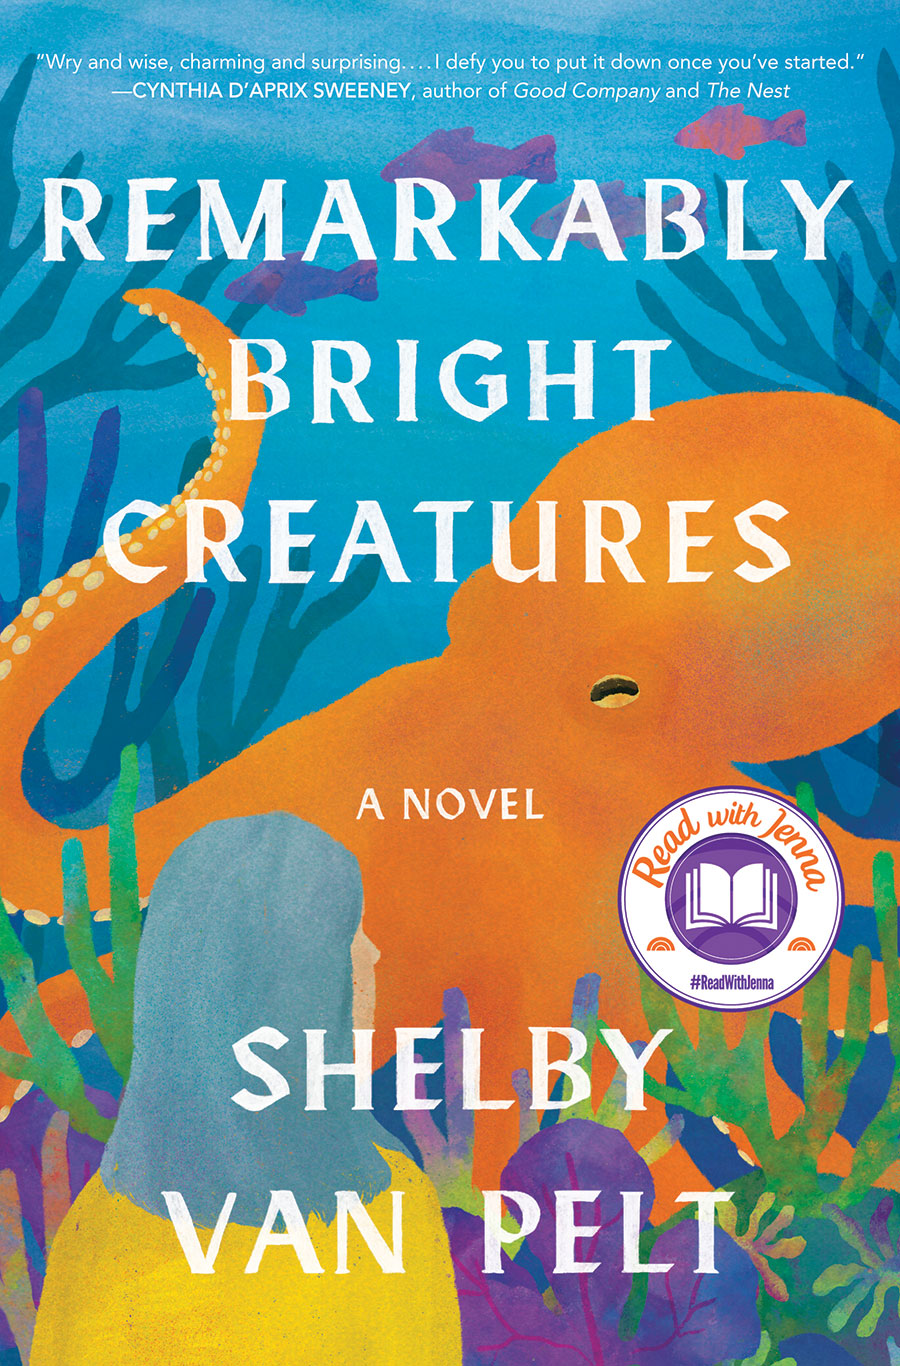 book cover of remarkably bright creature, blue with an orange octopus